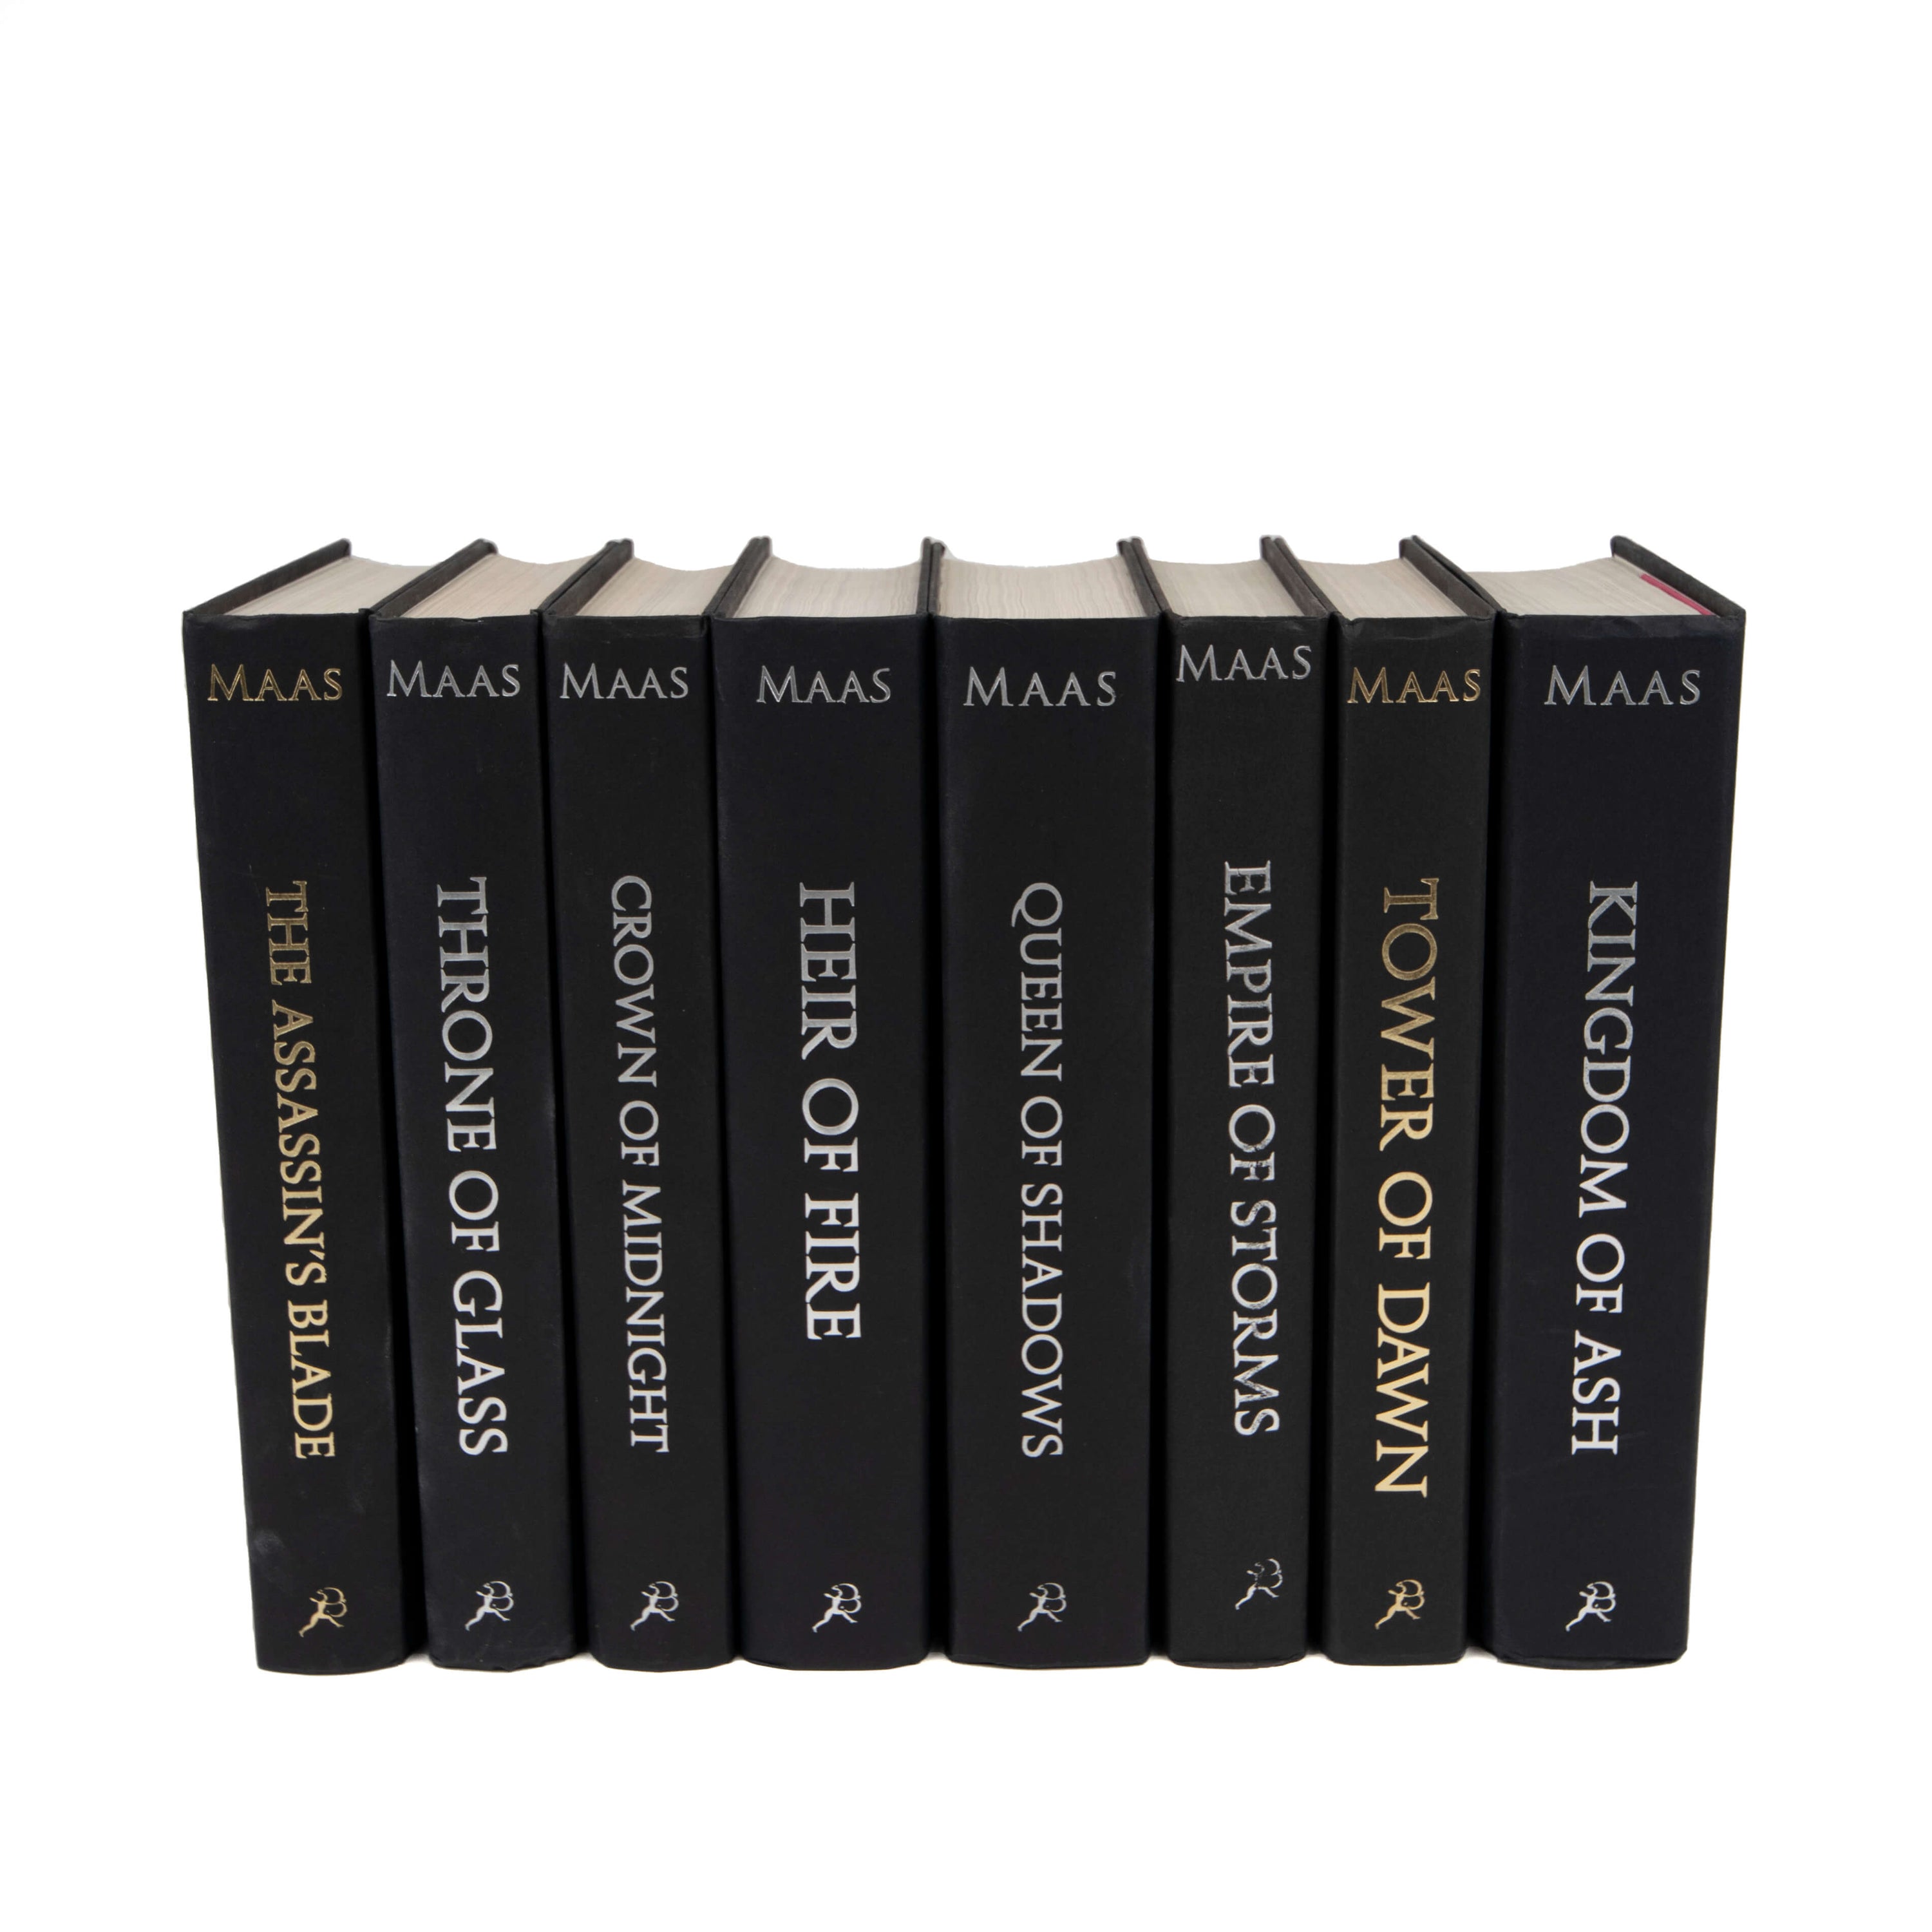 There are now multiple Throne of Glass hardcover book sizes available from the publisher. To ensure that your set looks fantastic on the shelf, we are making it easy to order made-to-order (MTO) Throne of Glass Jackets-Only for your books from this page.